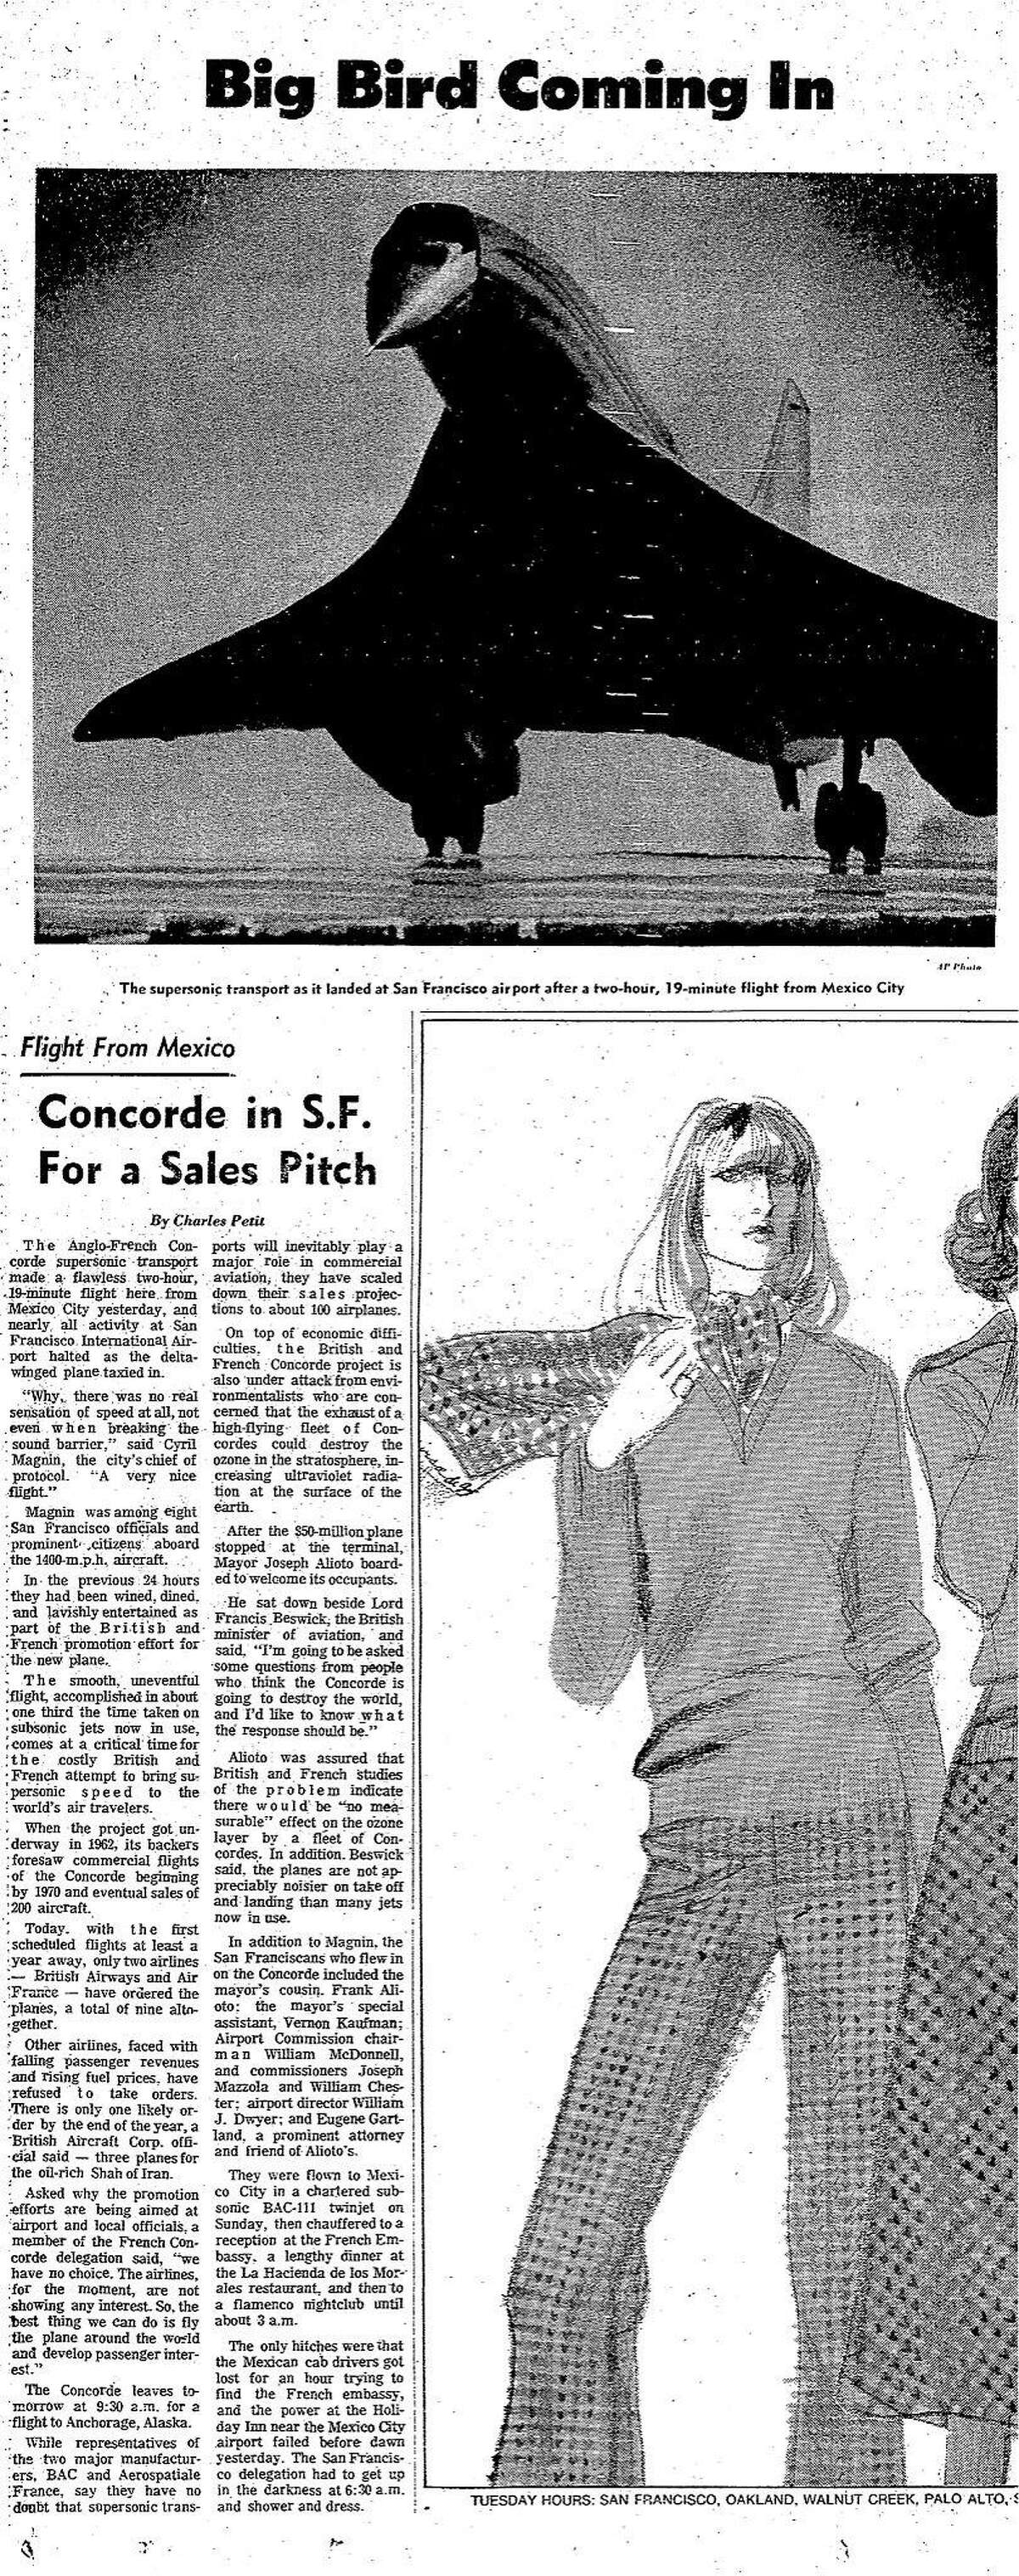 The October 22, 1974 Chronicle reports on the arrival, for the first time in the Bay Area, the Concorde, which would touch down at San Francisco International Airport